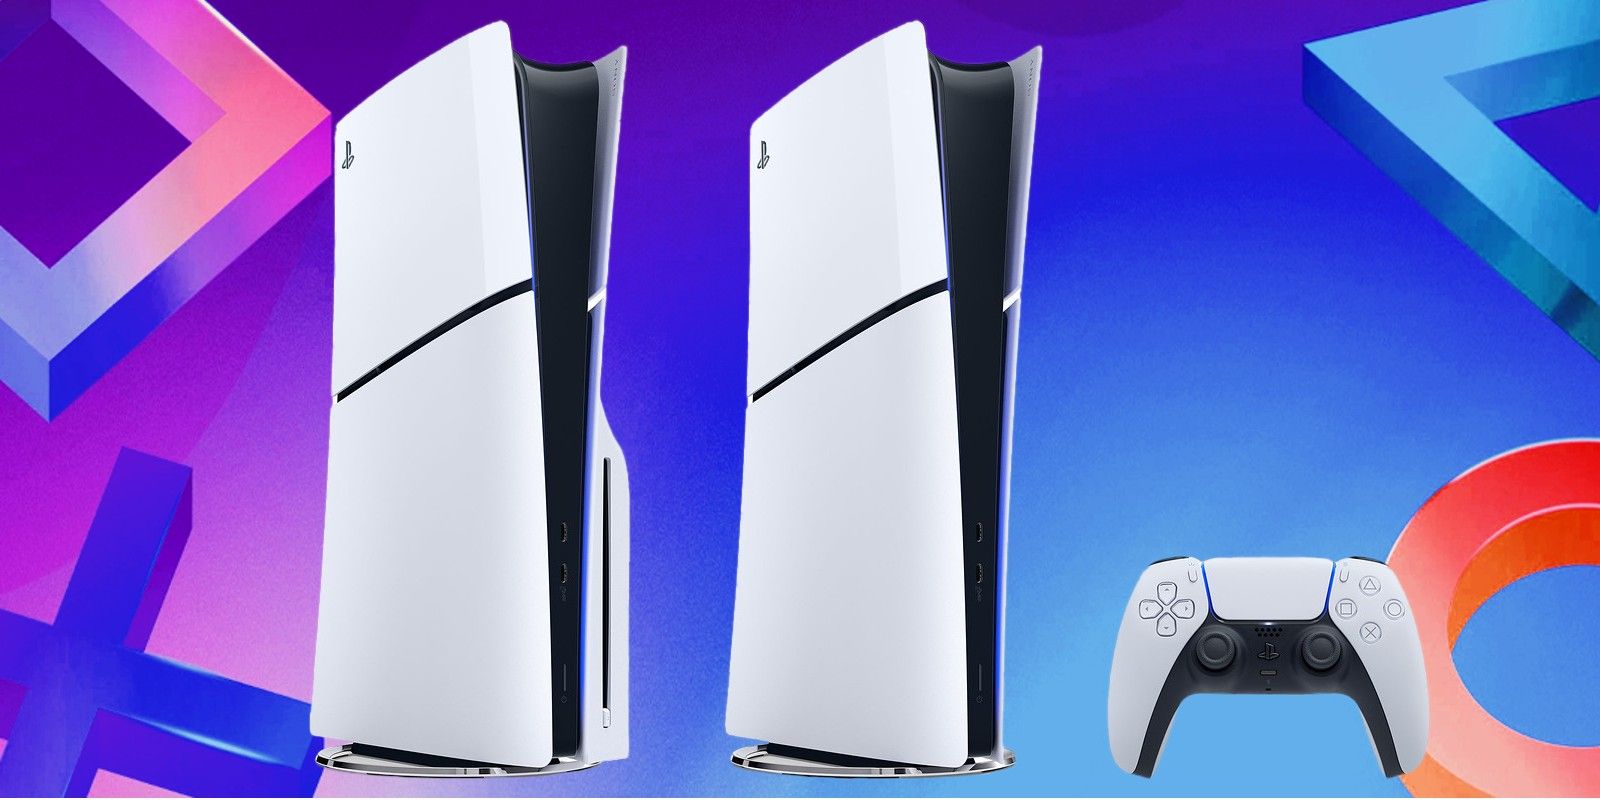 Two new PS5's, one with the disc drive and one without, standing vertically next to a DualSense controller. The background is blue and purple, and includes the cross, square, circle, and triangle symbols of the PlayStation controller.